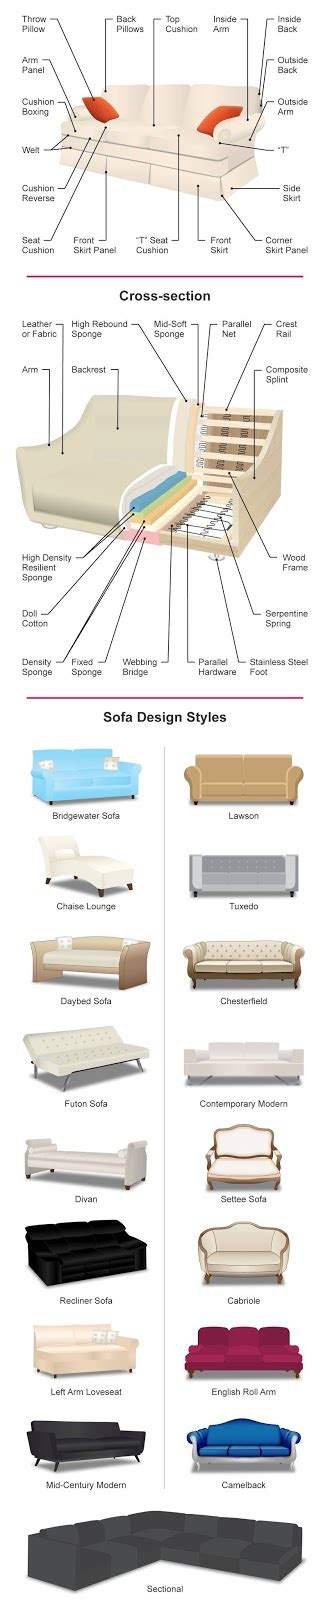 20 Types Of Sofas And Couches Styles Explained